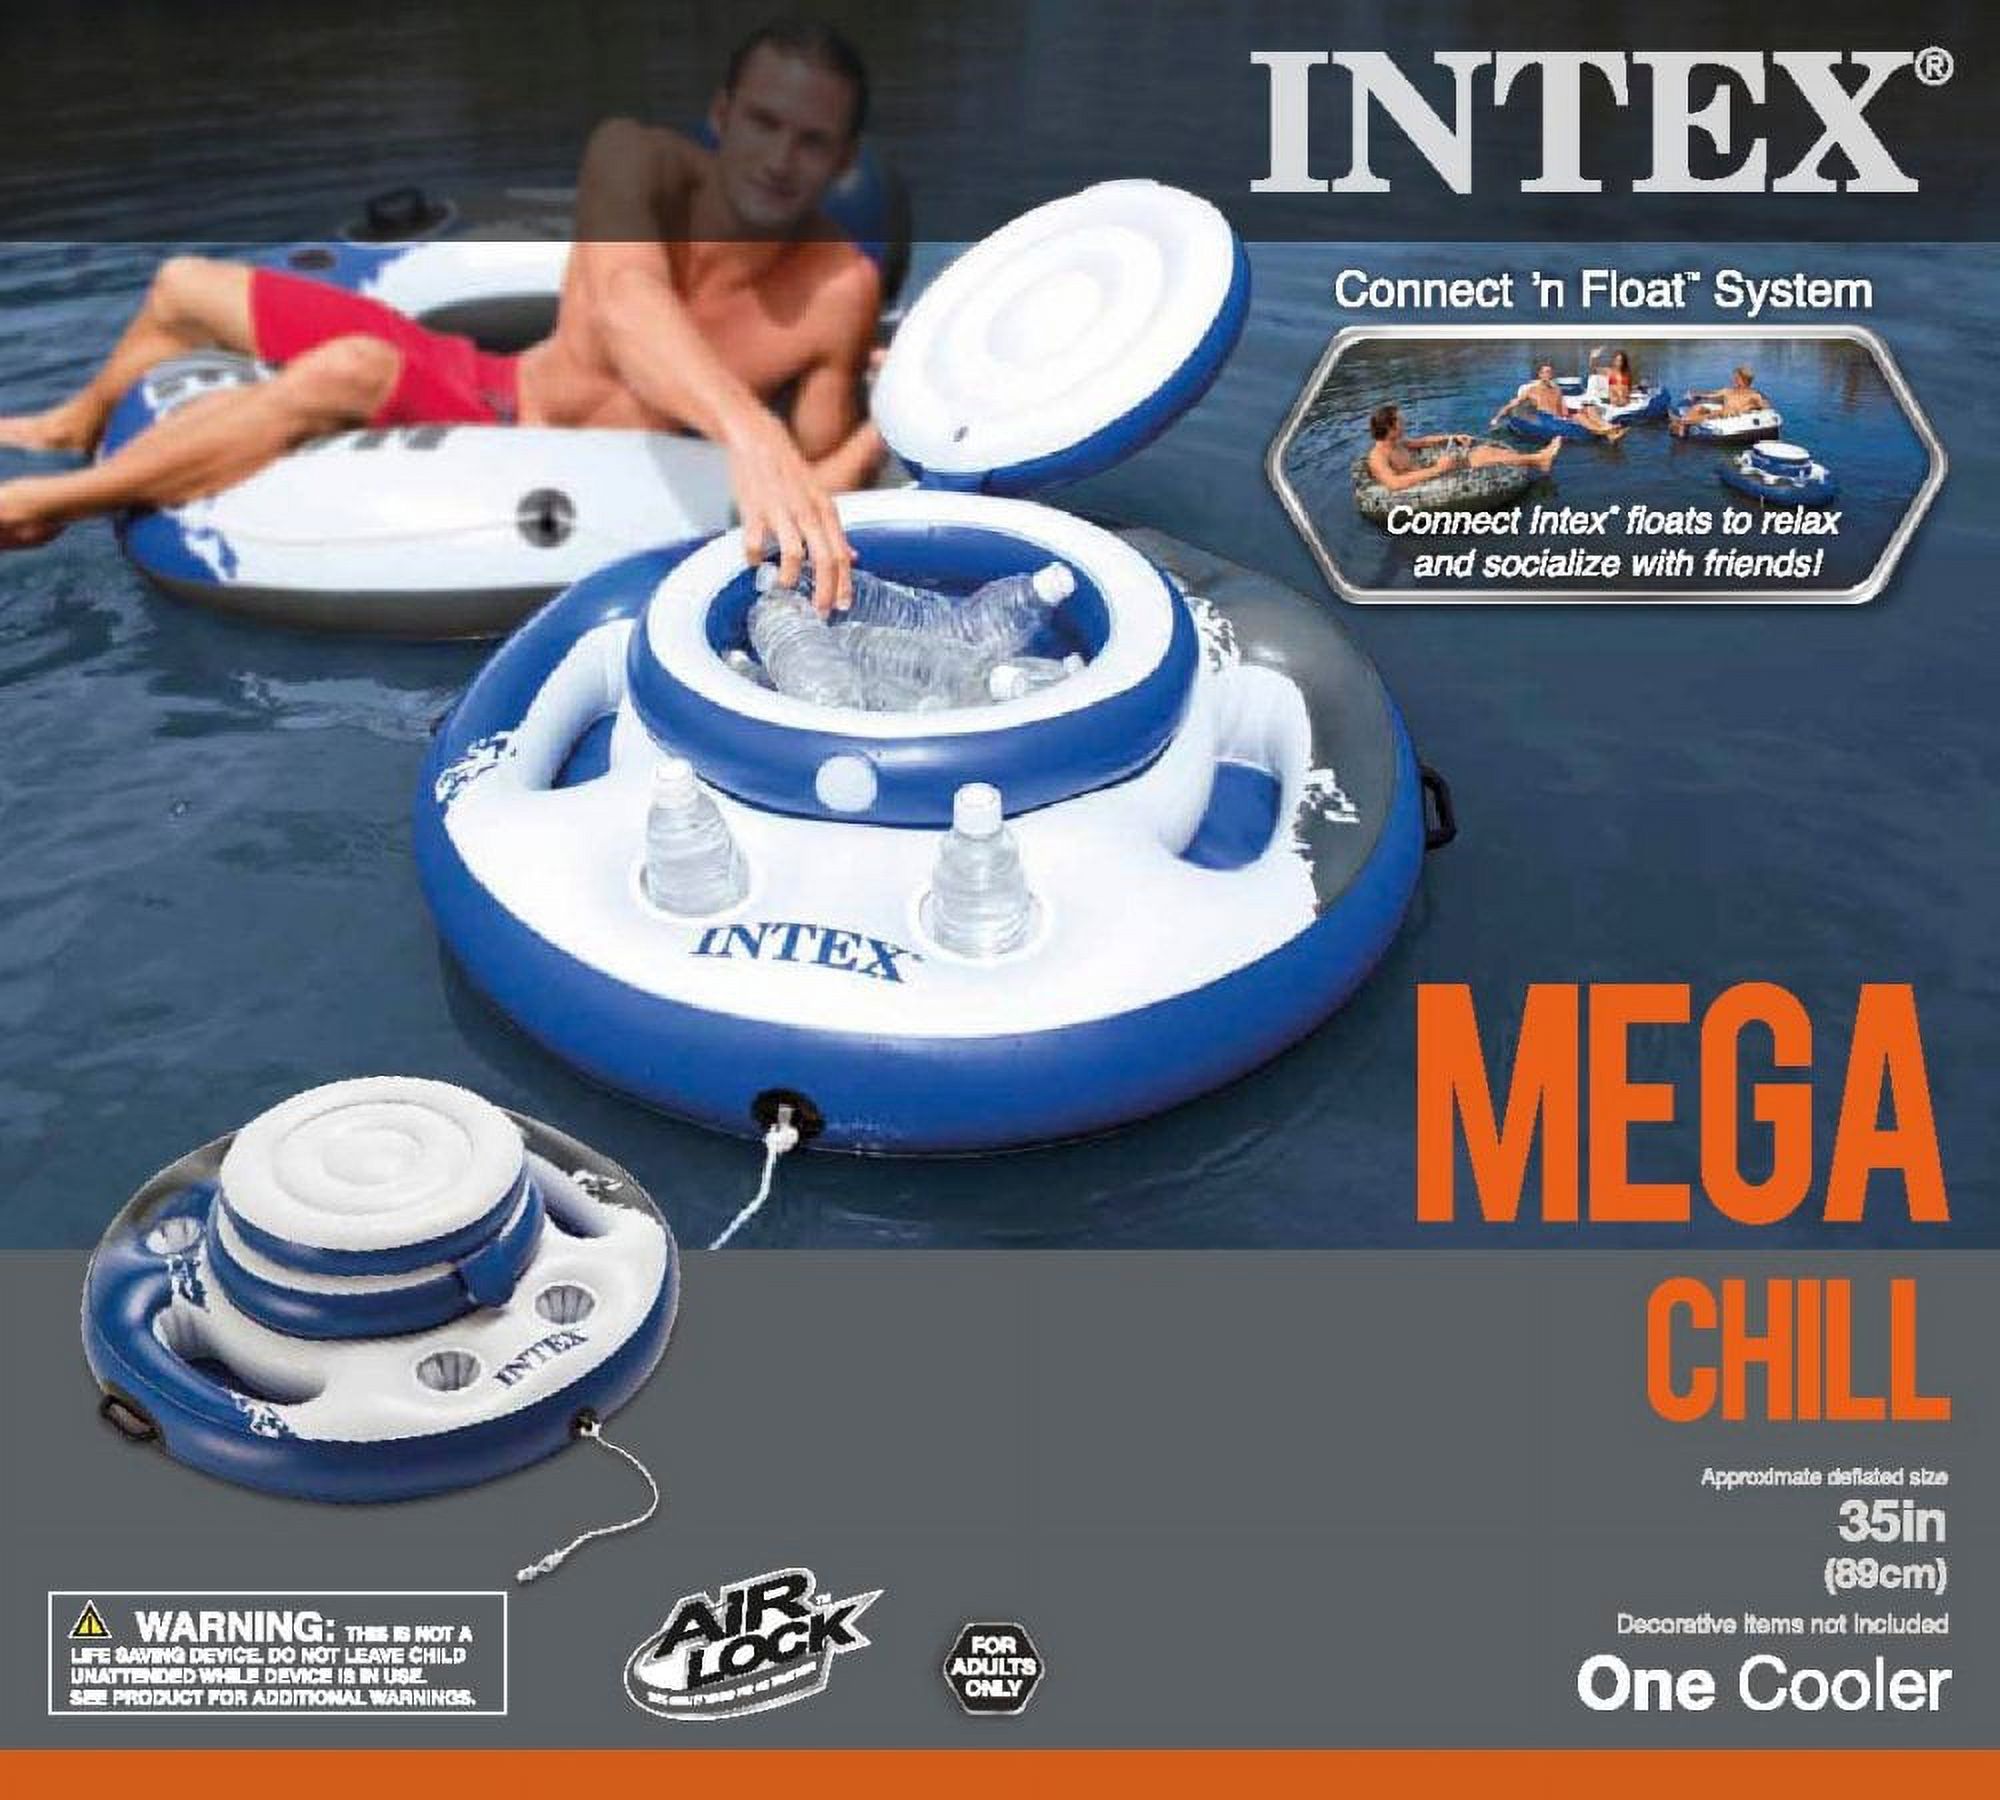 Intex Mega Chill Inflatable Float For Water Use - image 3 of 6